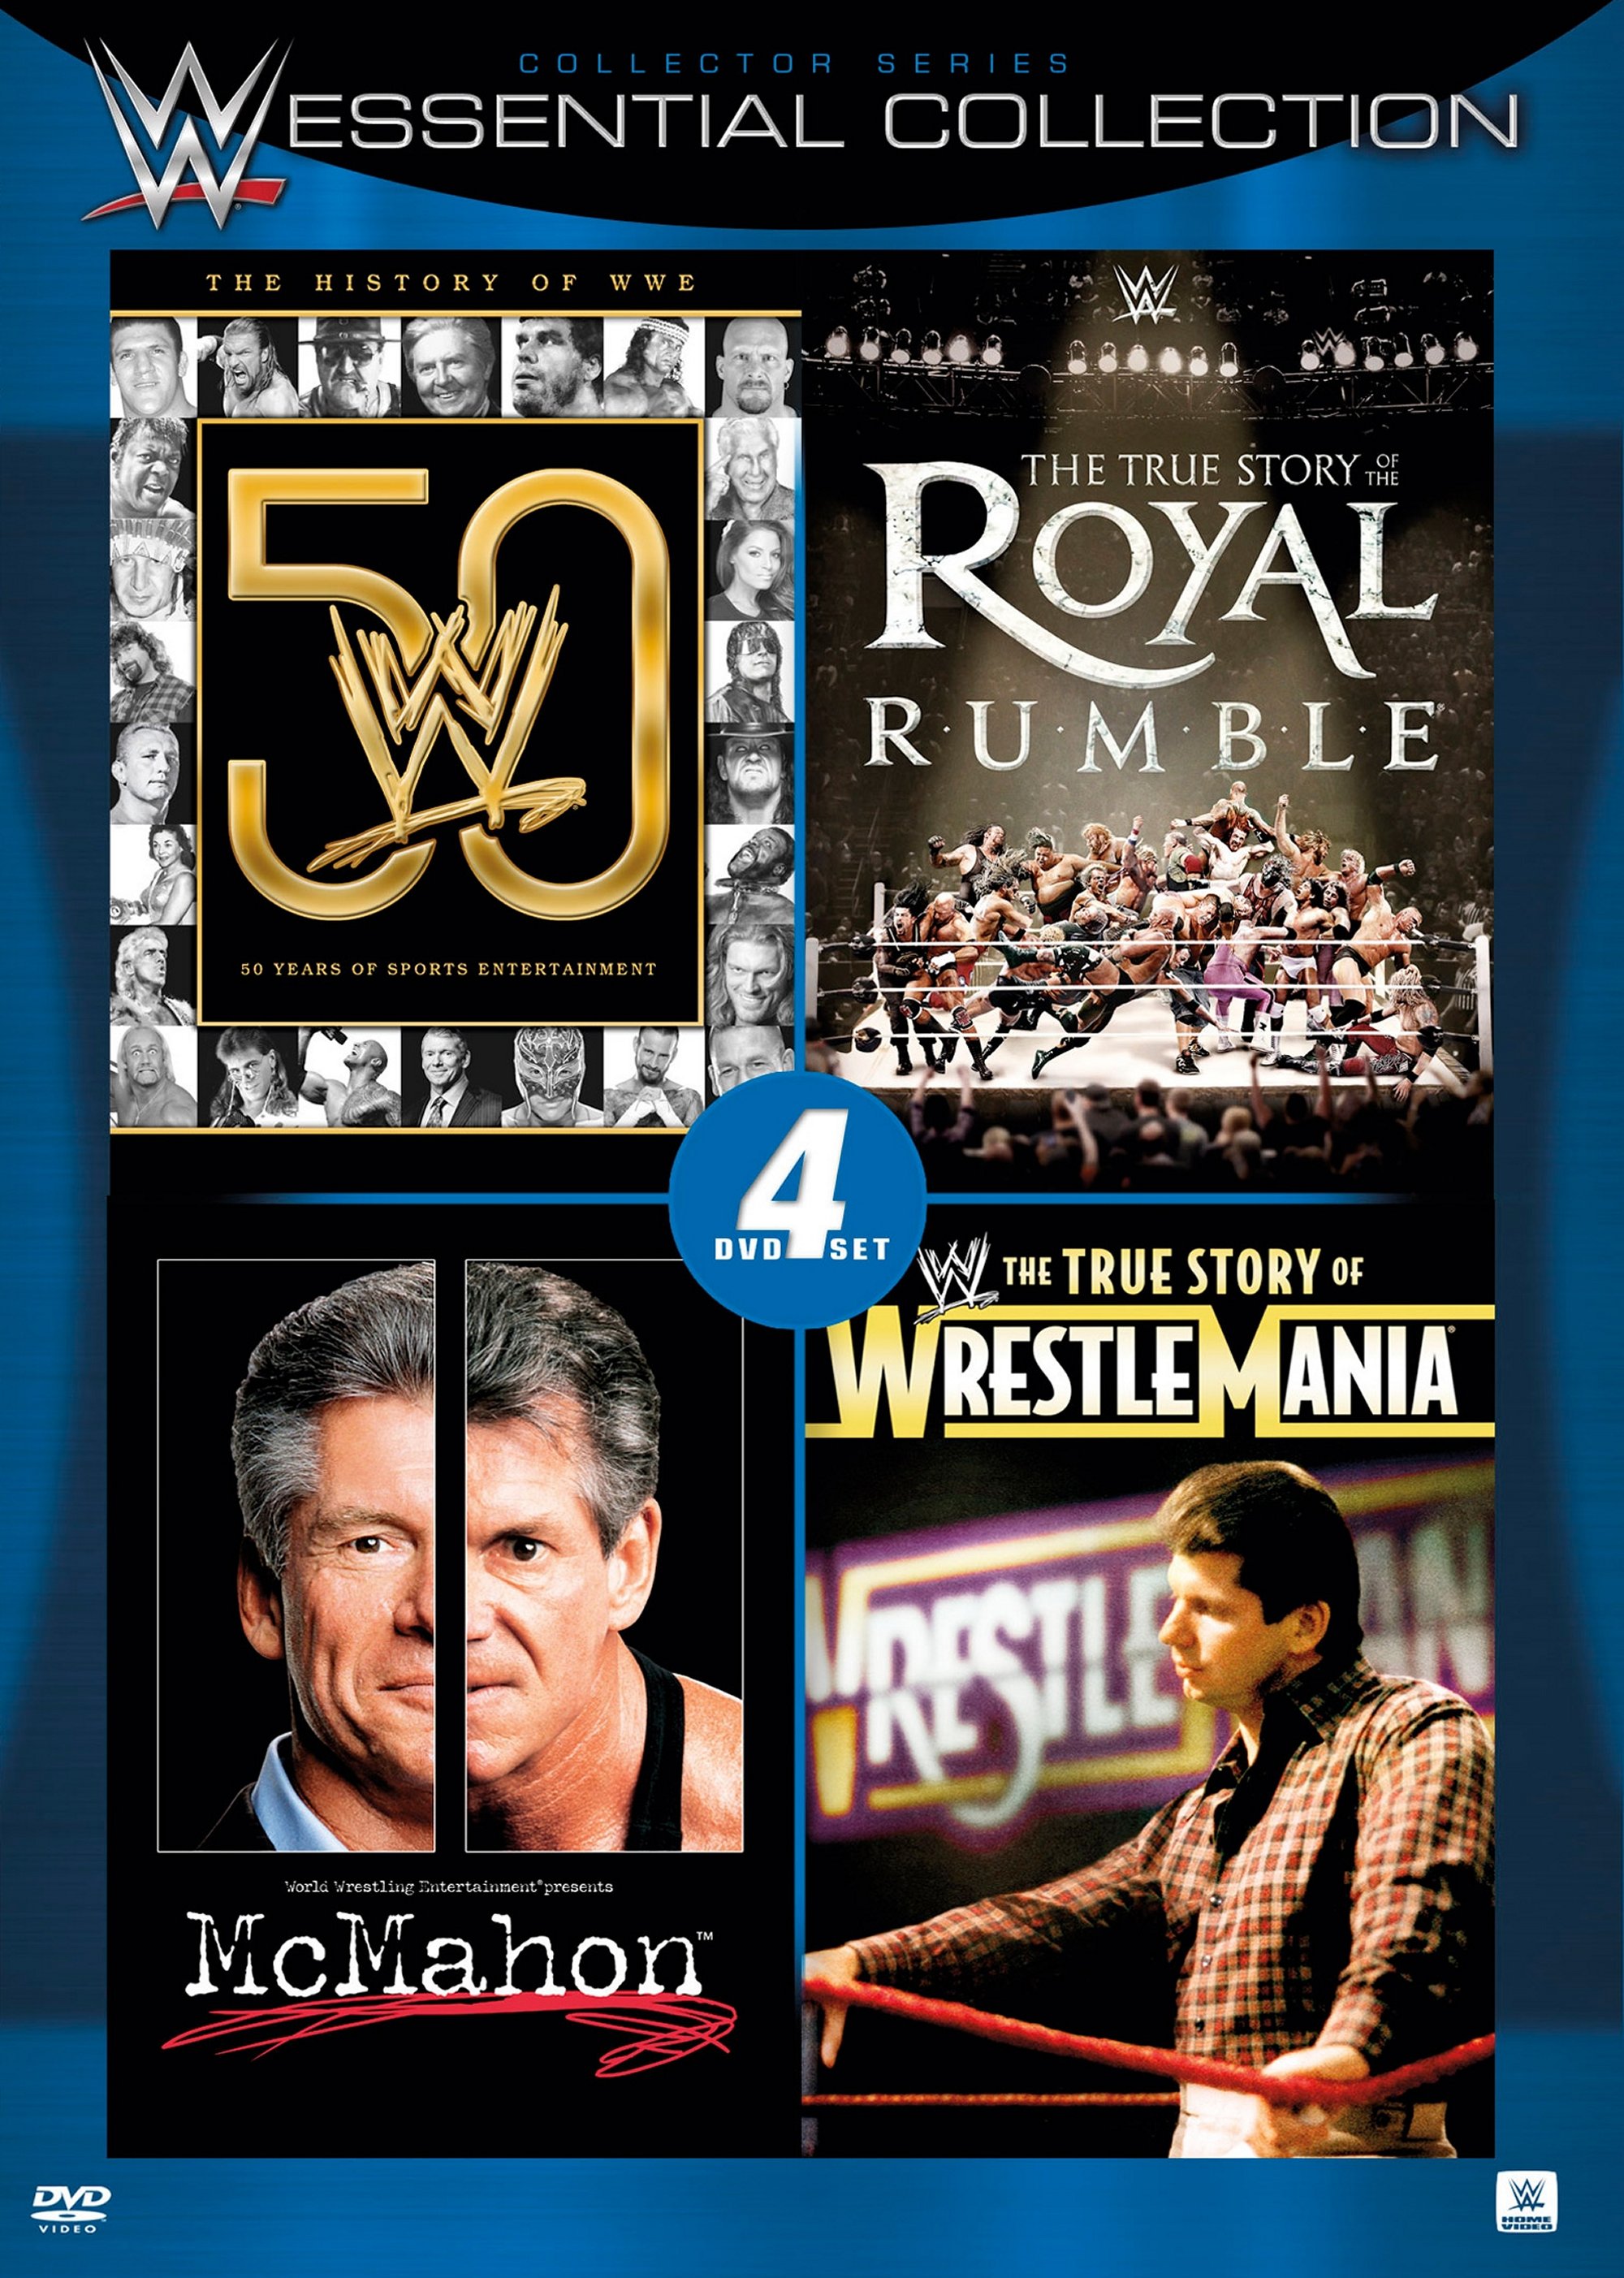 4 Film Favorites: WWE - Essential WWE Collection [DVD]